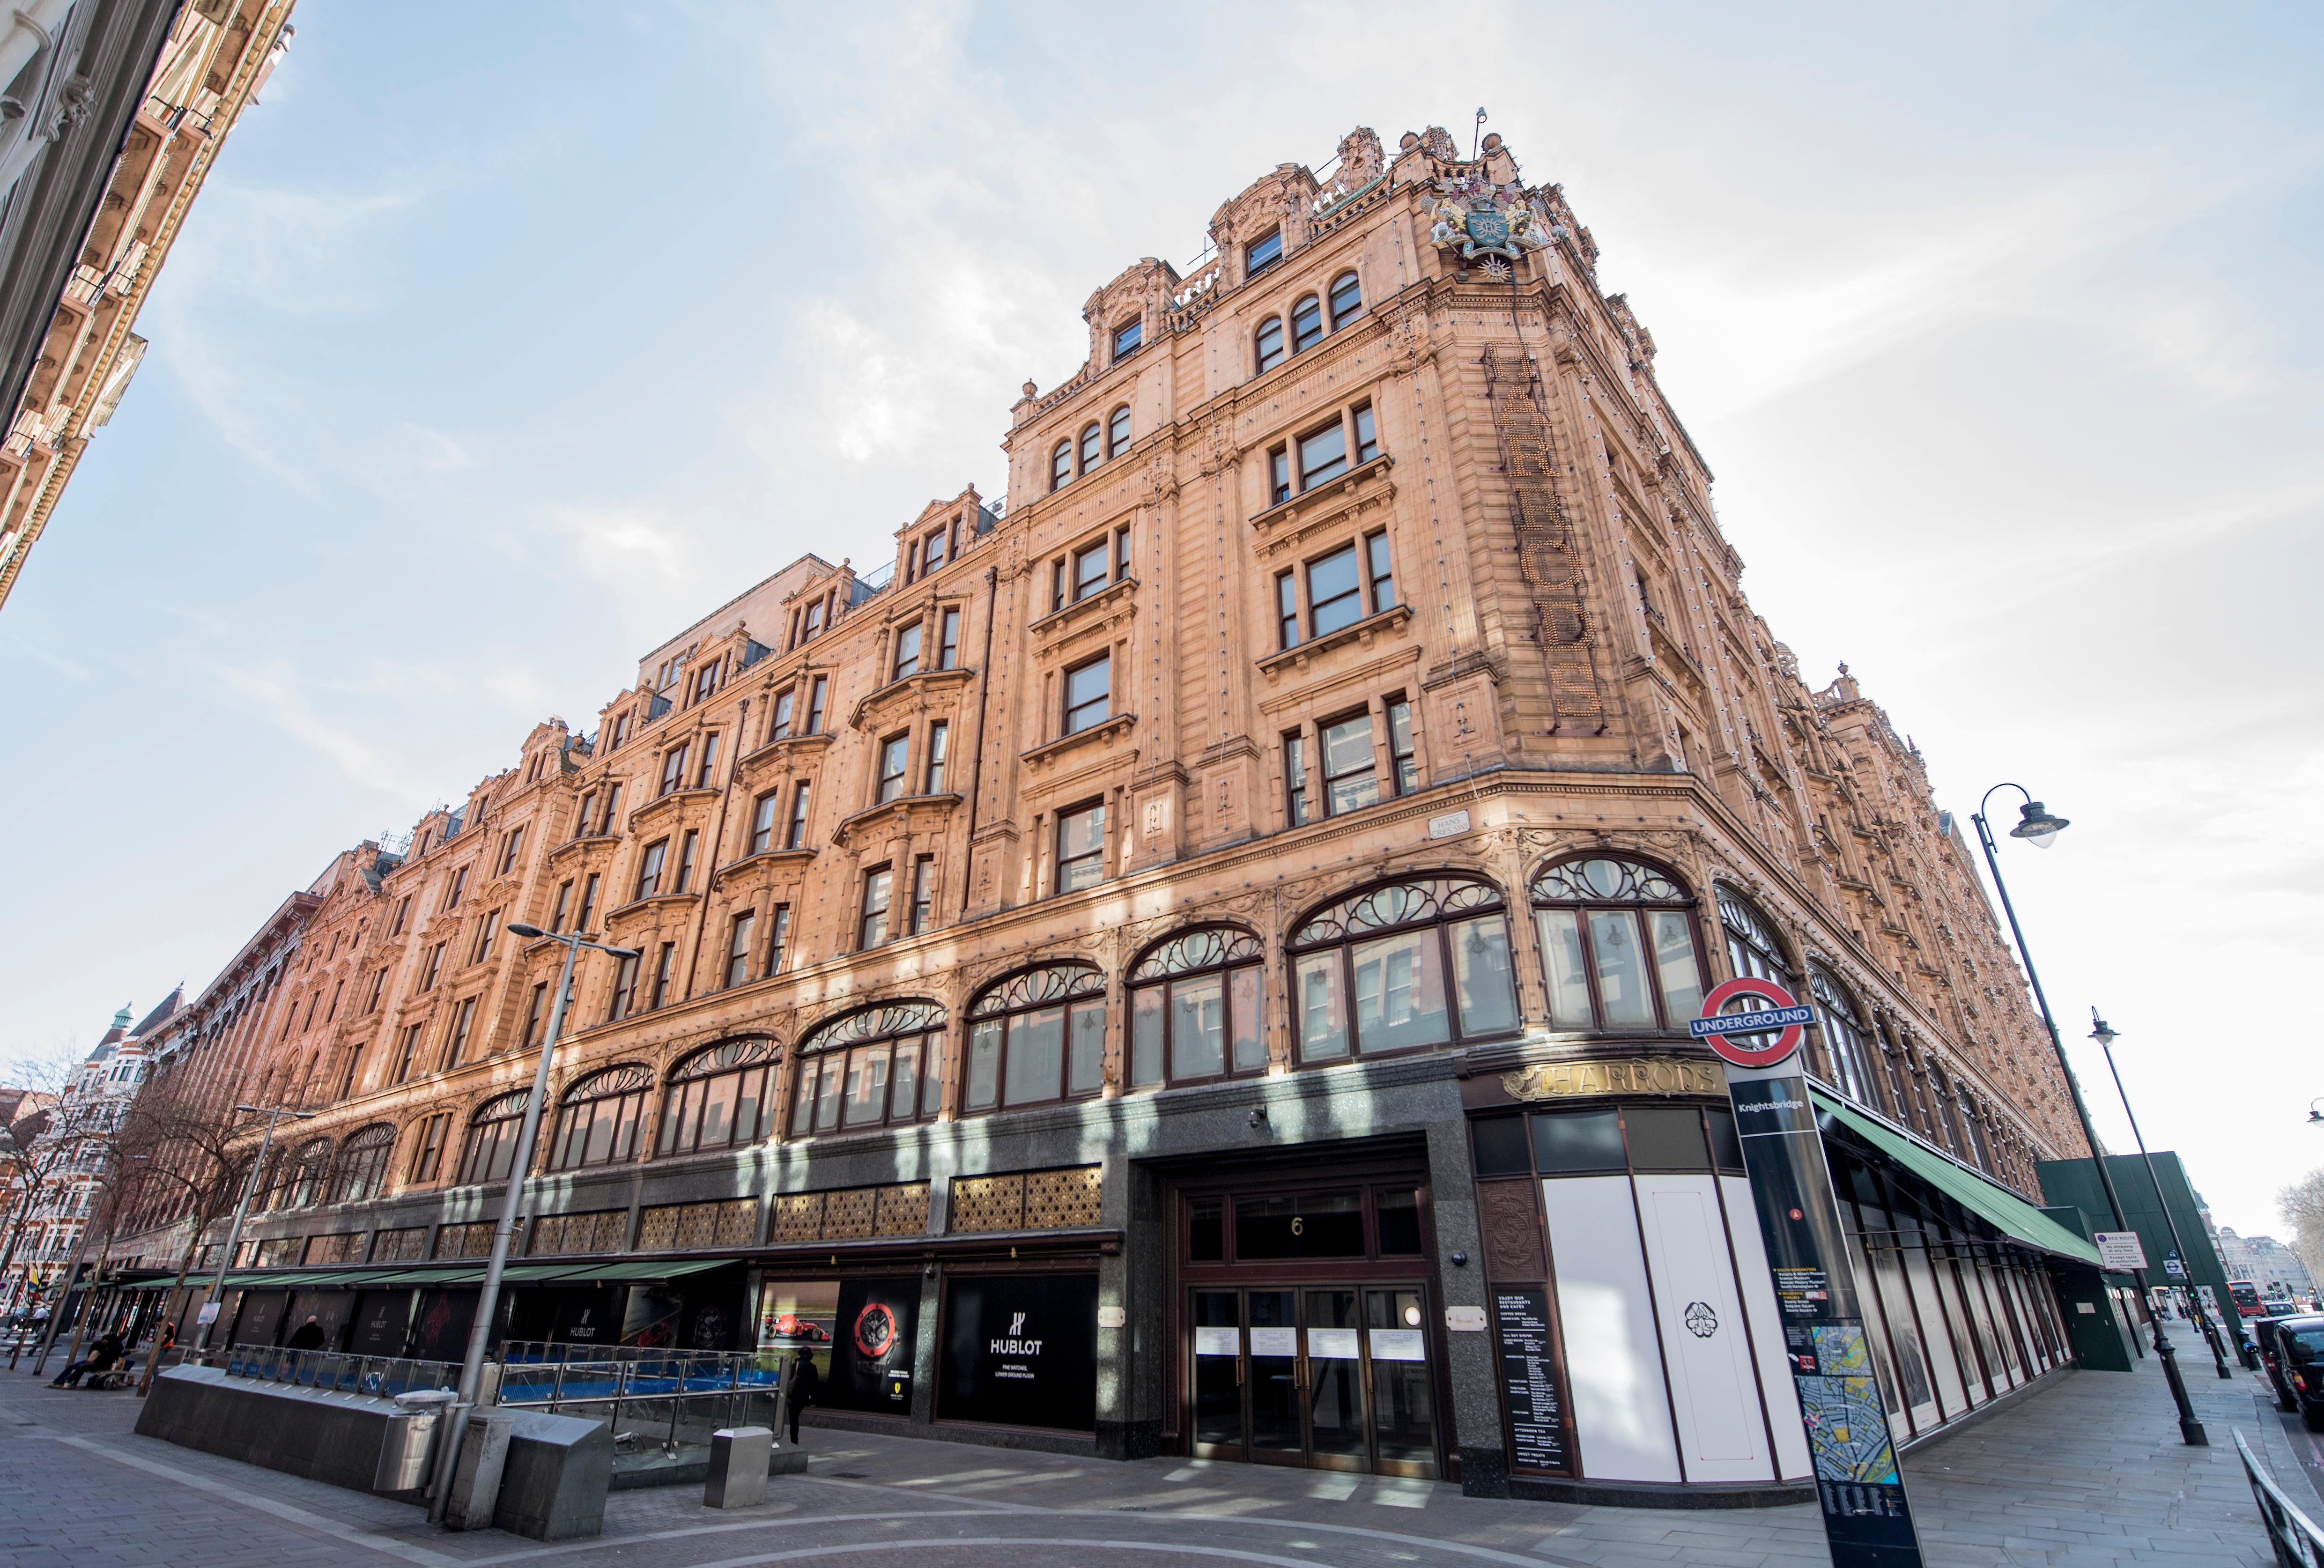 The attack took place late on Saturday night in Harrods departments store